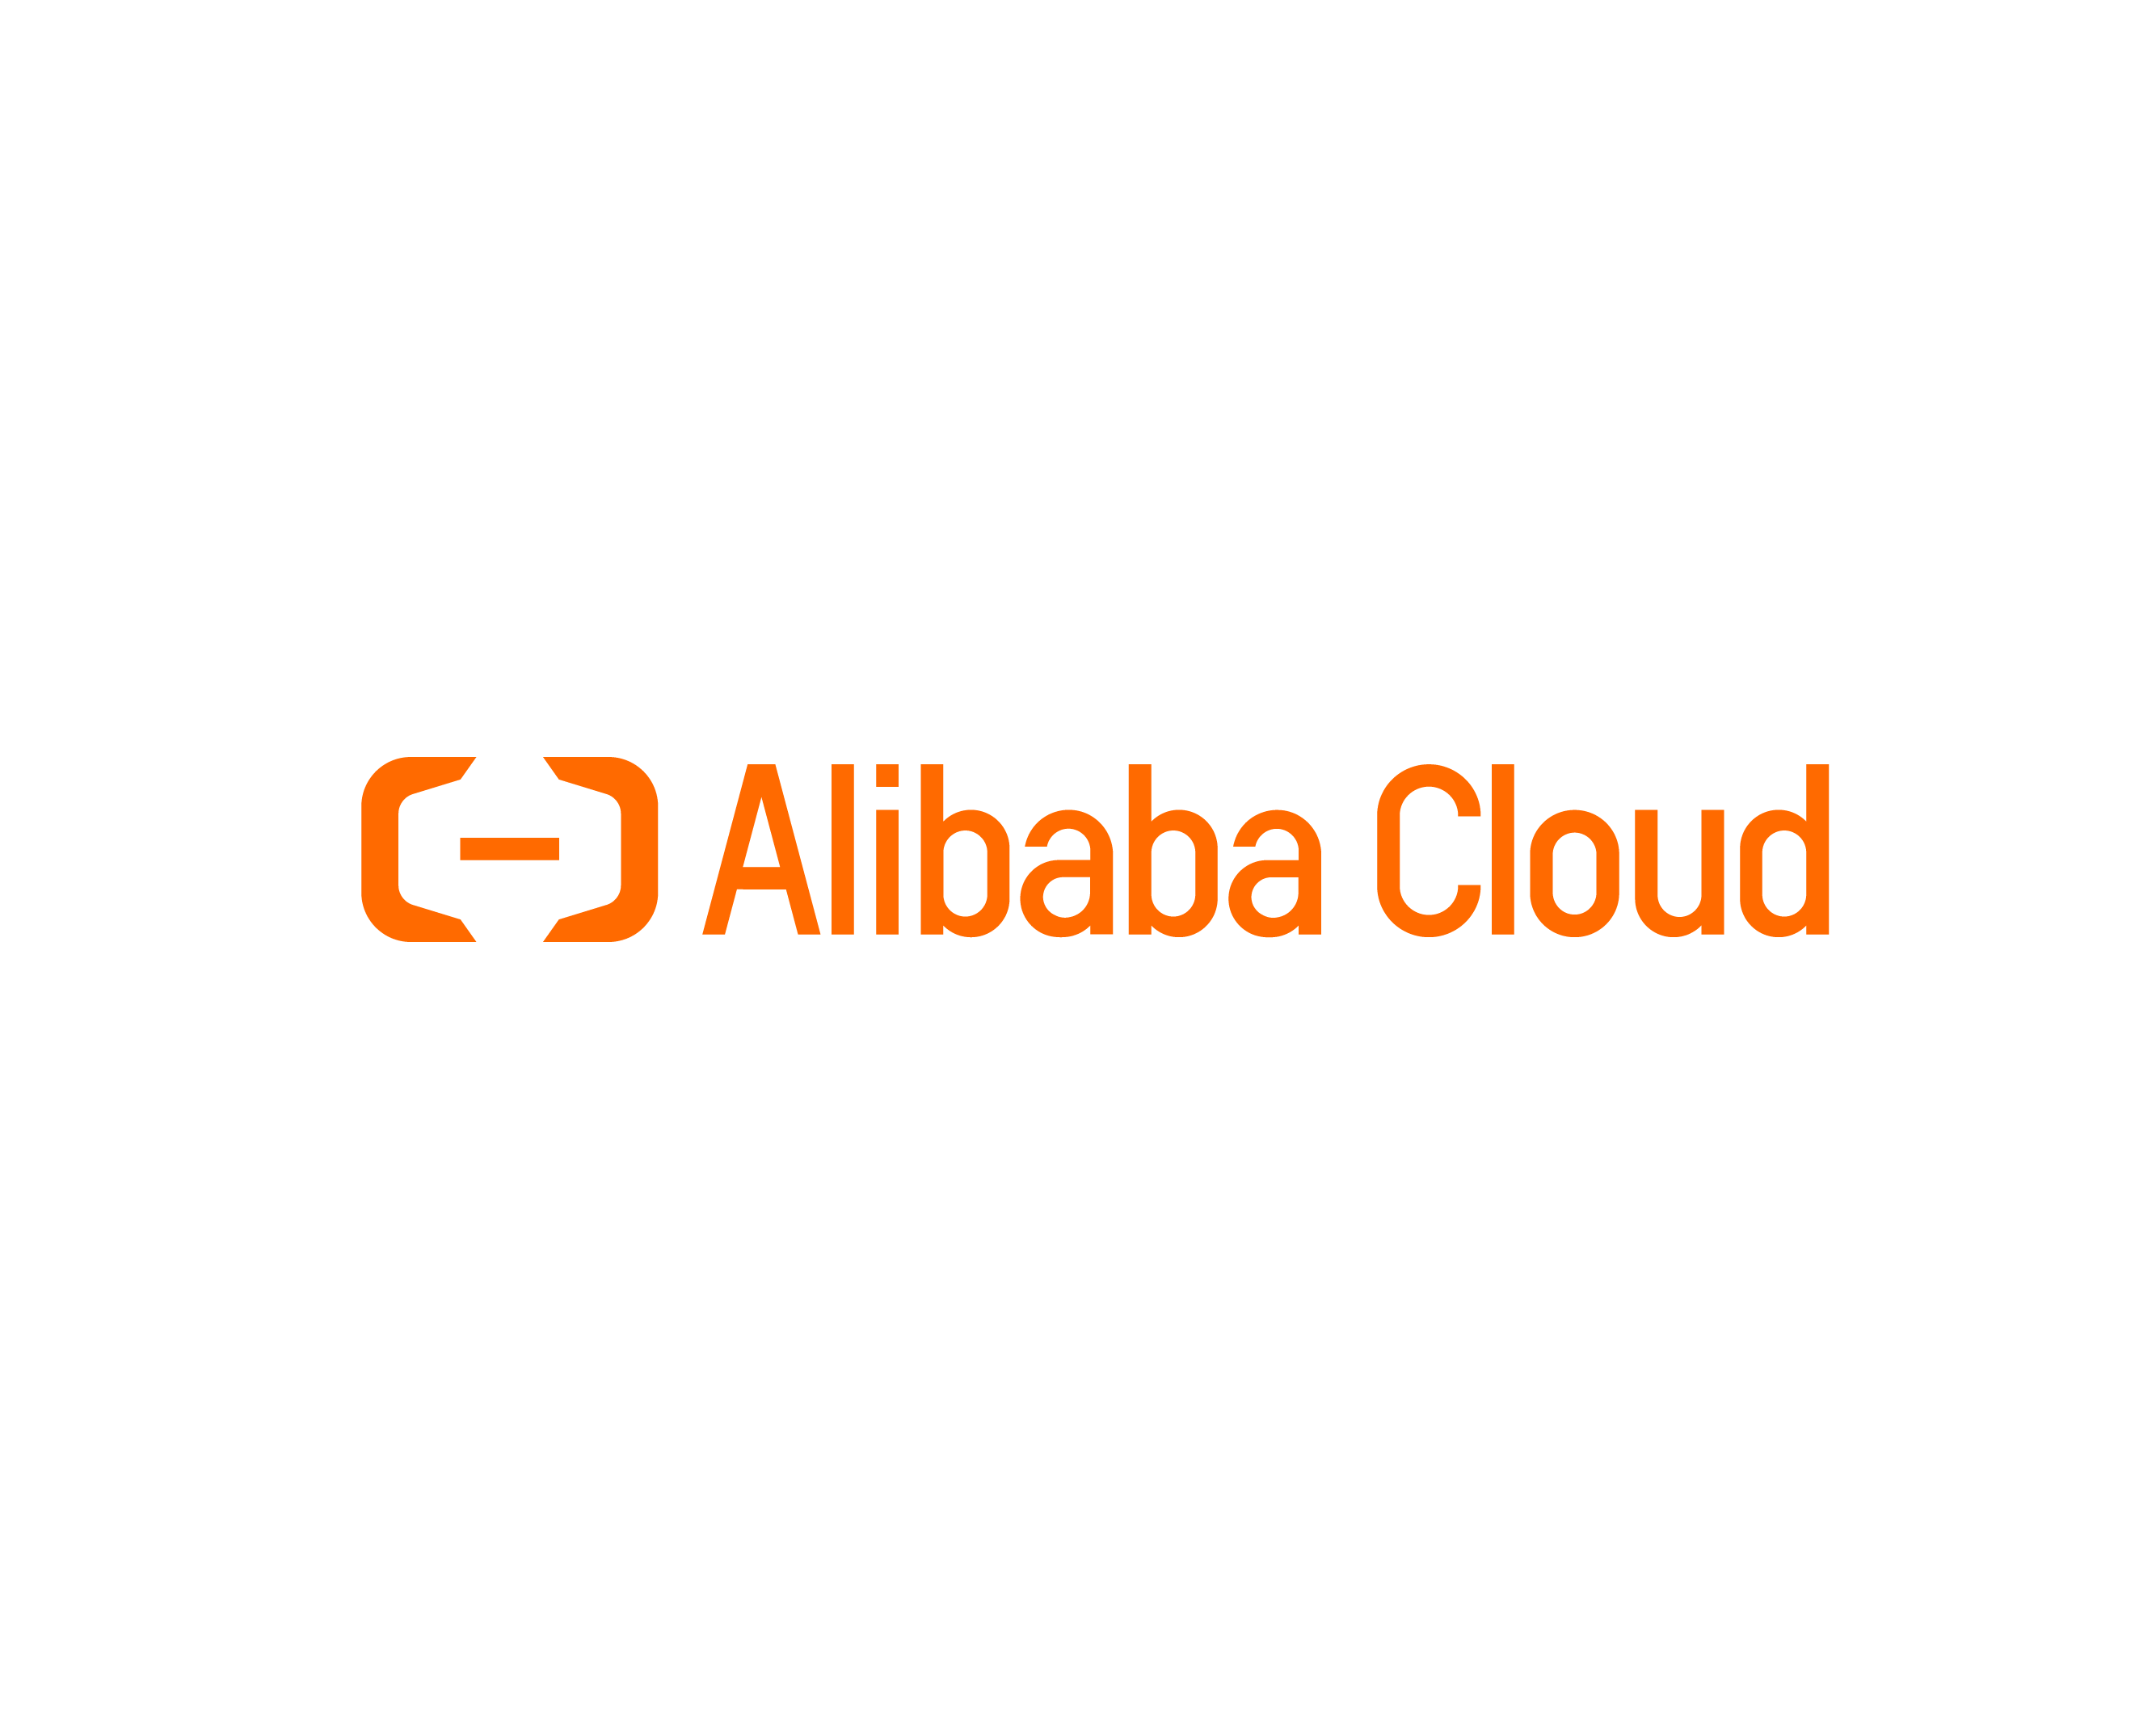 A Continuous Journey of Digital Transformation - Alibaba Cloud and Its Global Customers at